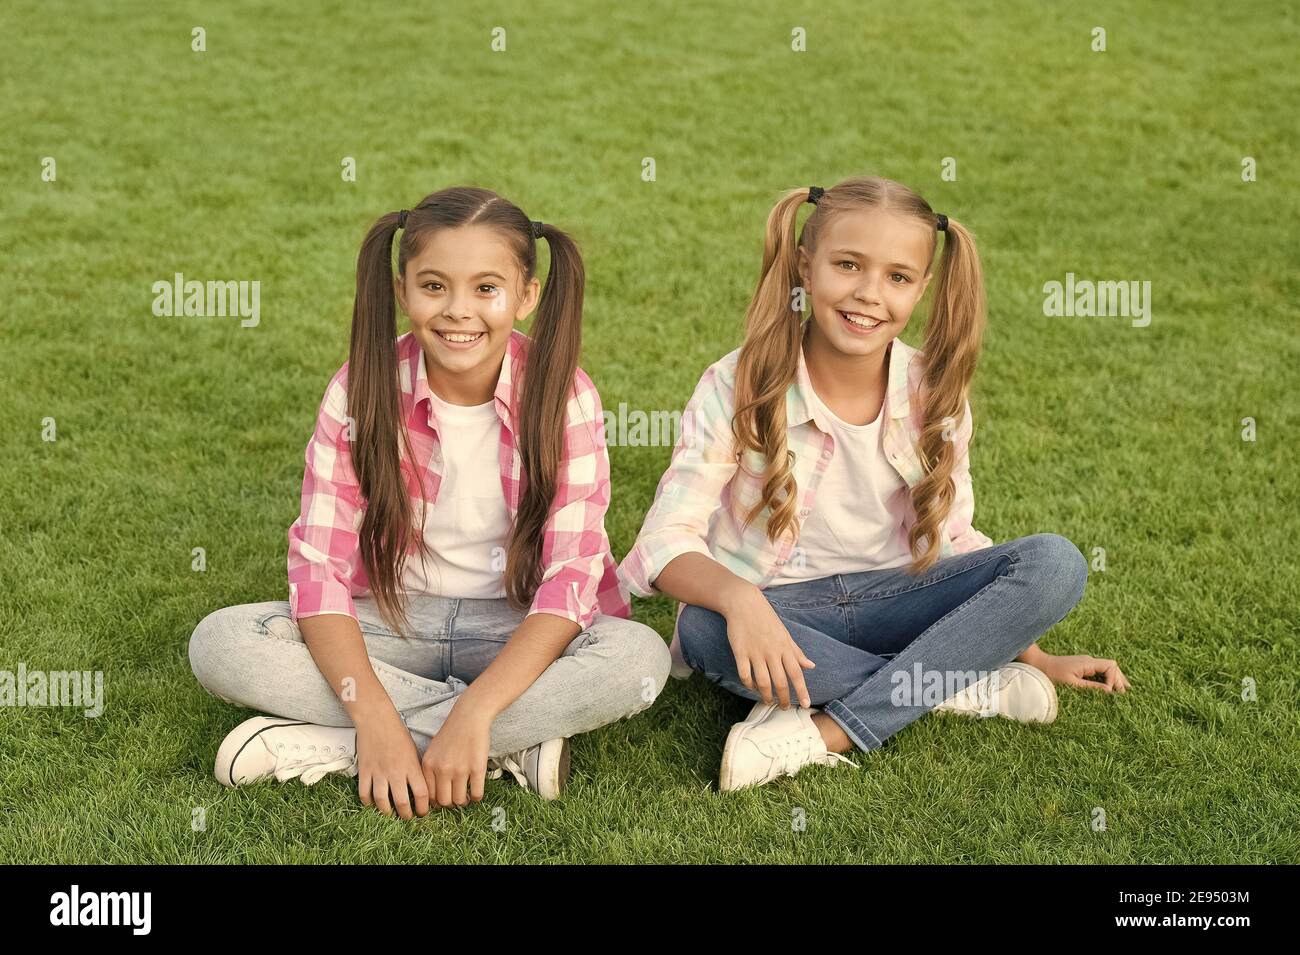 Children are future. Little children sit on green grass. Happy children have fun outdoors. Small children with fashion look. Casual style trend. Happy childhood. International childrens day. Stock Photo